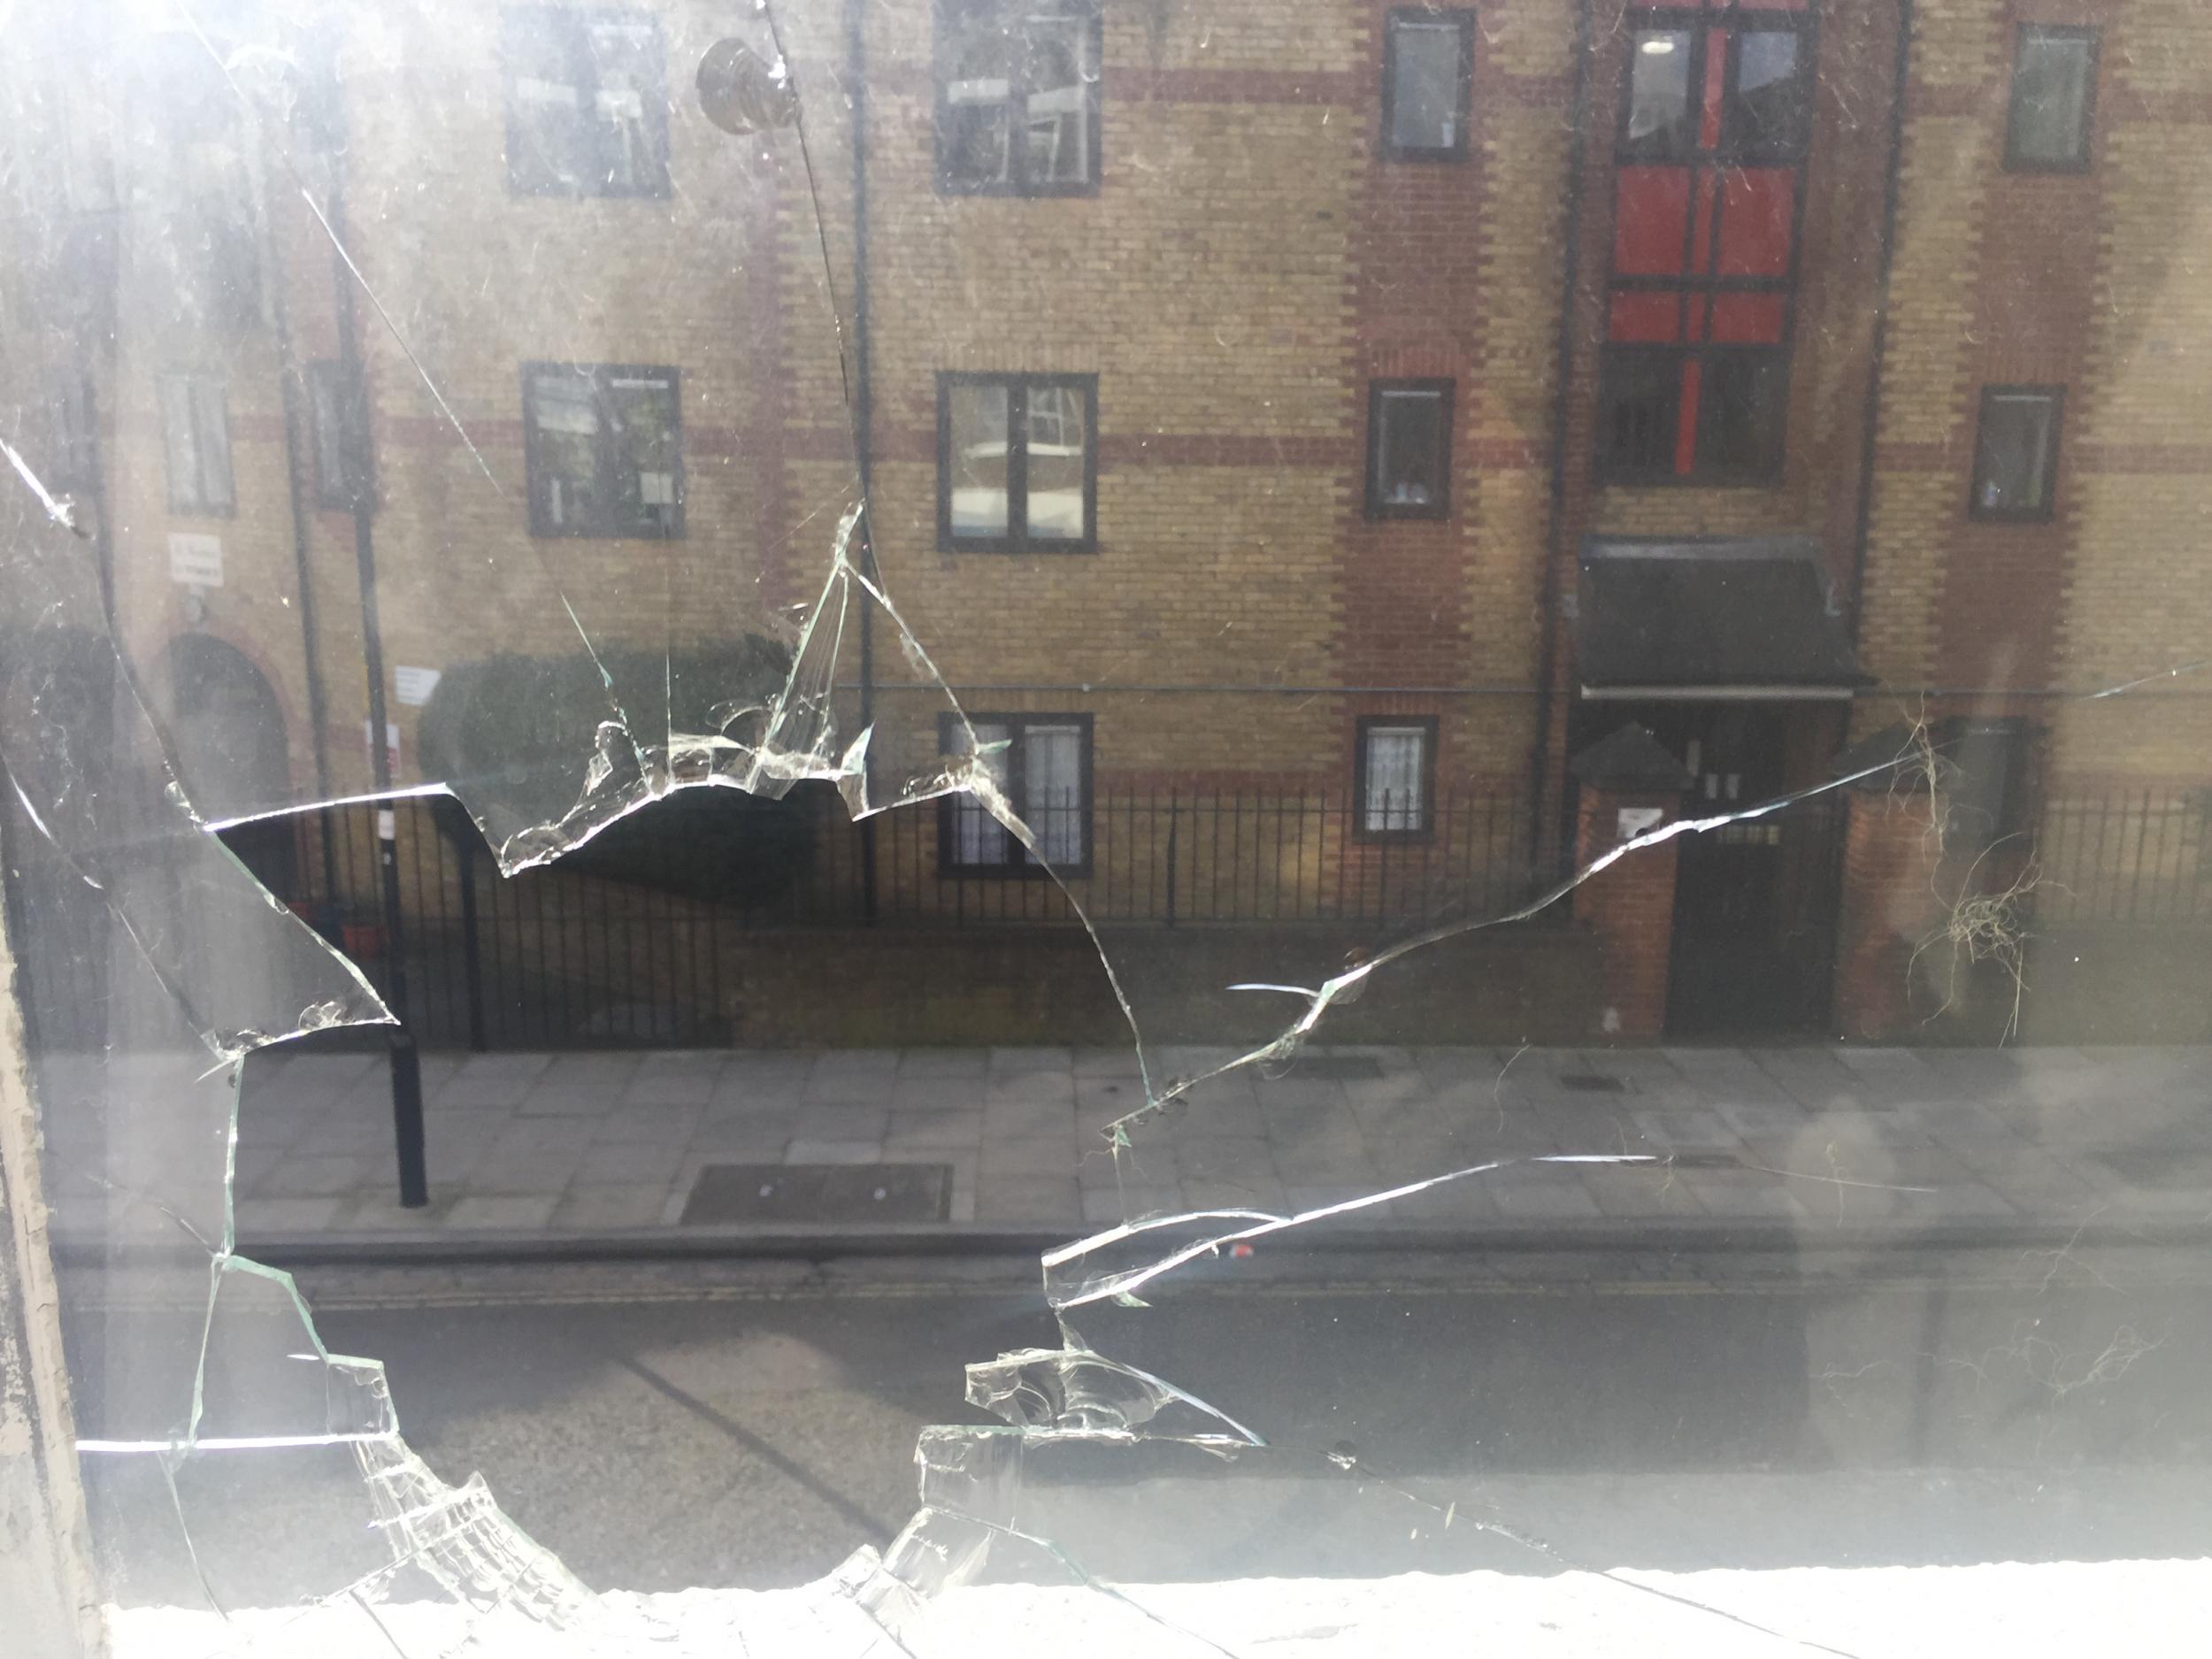 Photographs supplied by Ms Diego purportedly showing a smashed window from inside the gallery